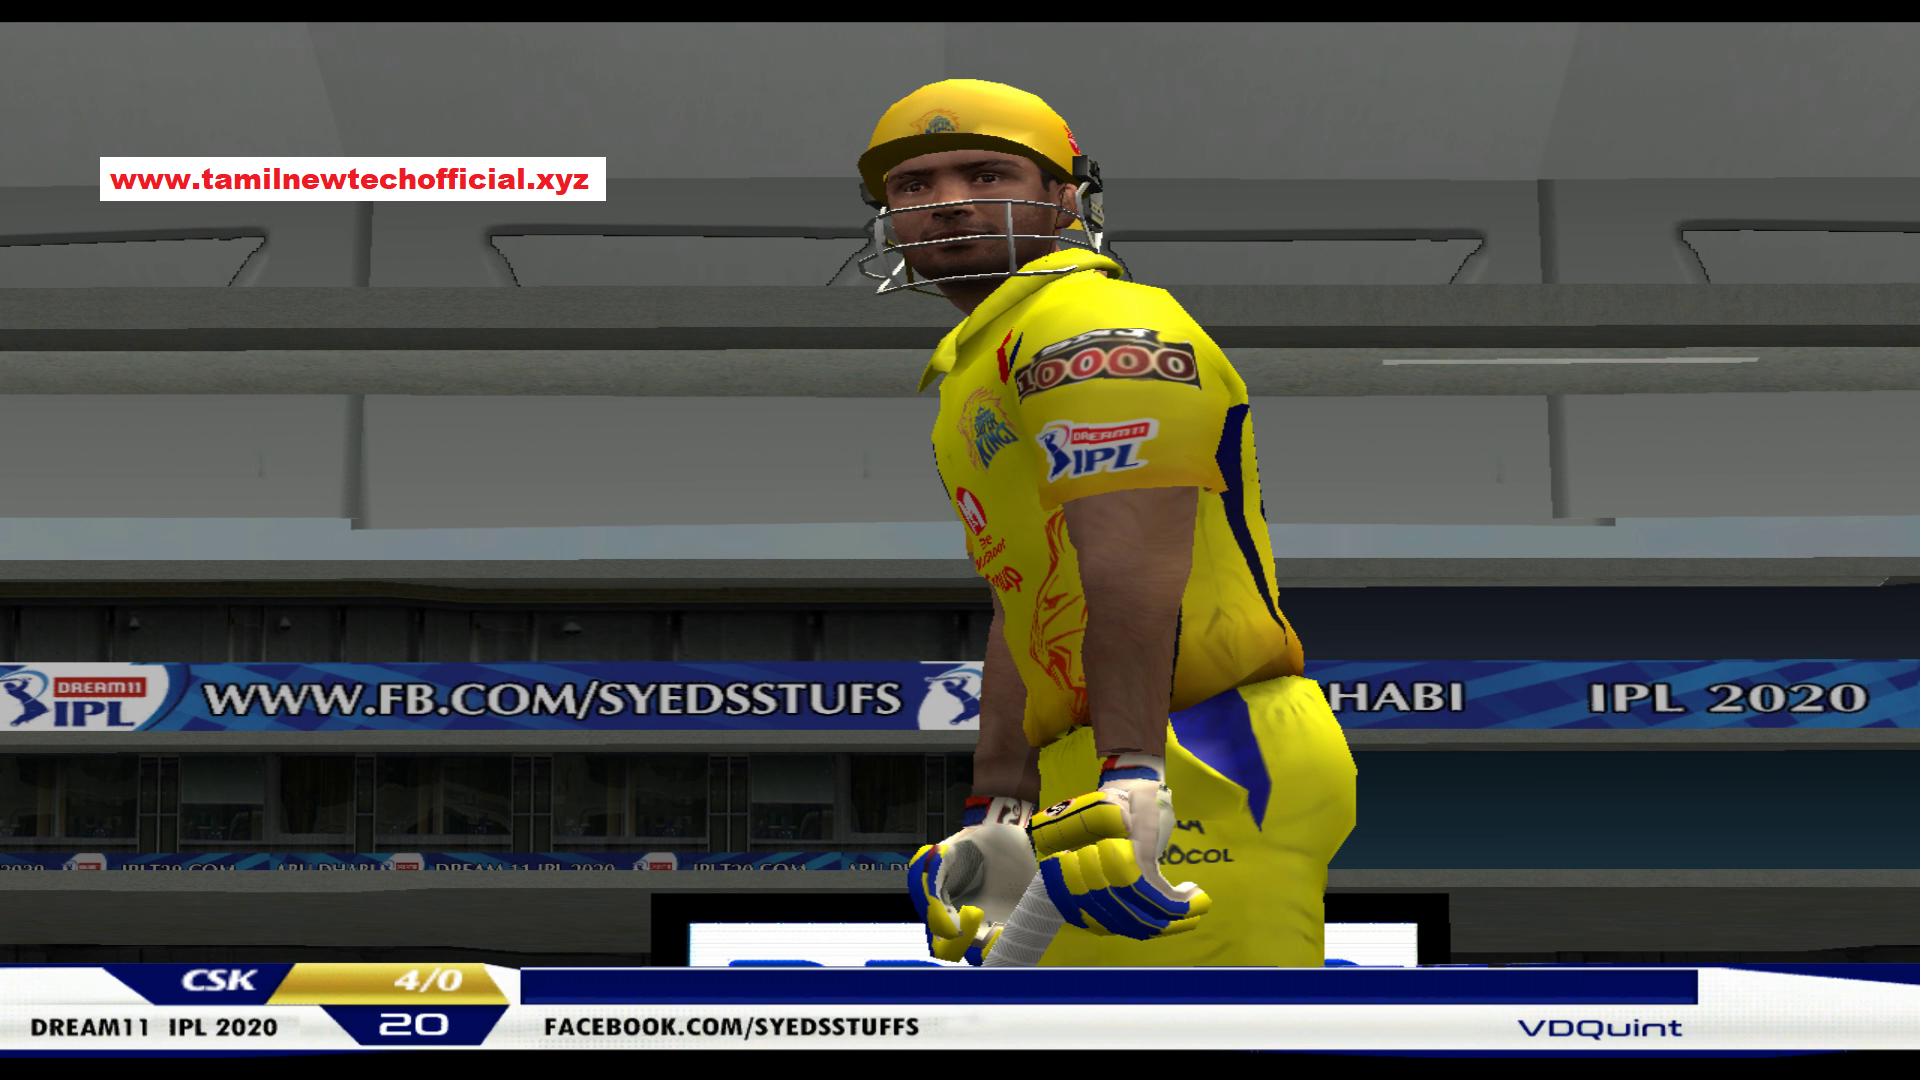 cricket 2007 save files download